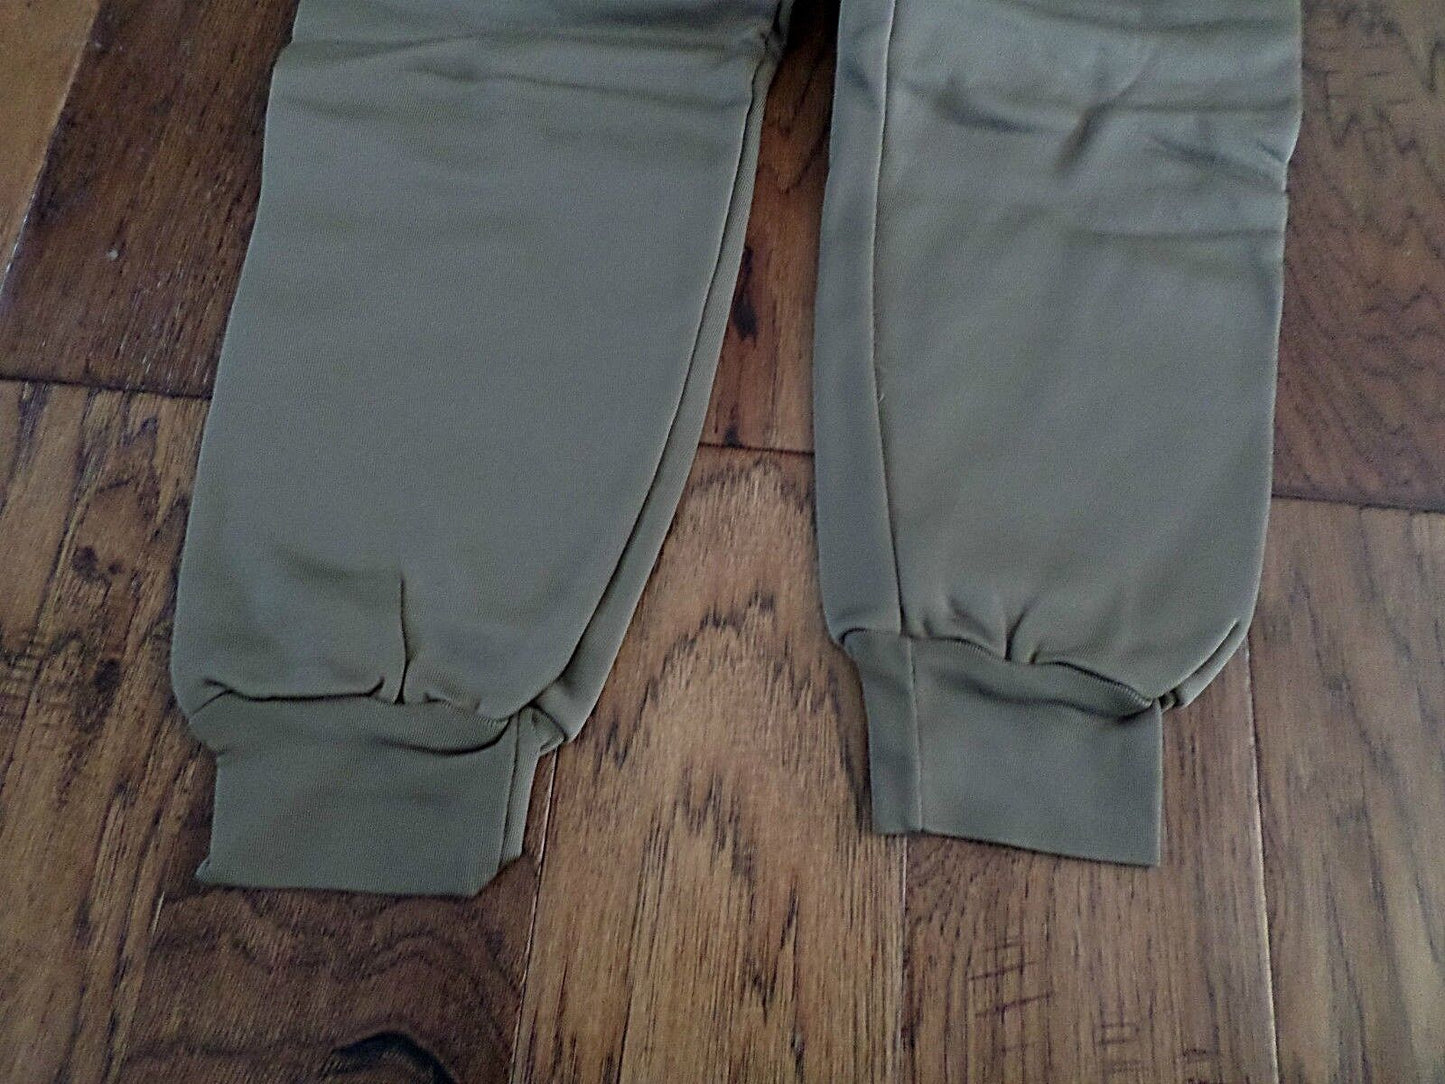 GENUINE U.S MILITARY ARMY COLD WEATHER POLYPROPYLENE UNDER PANTS X-LARGE